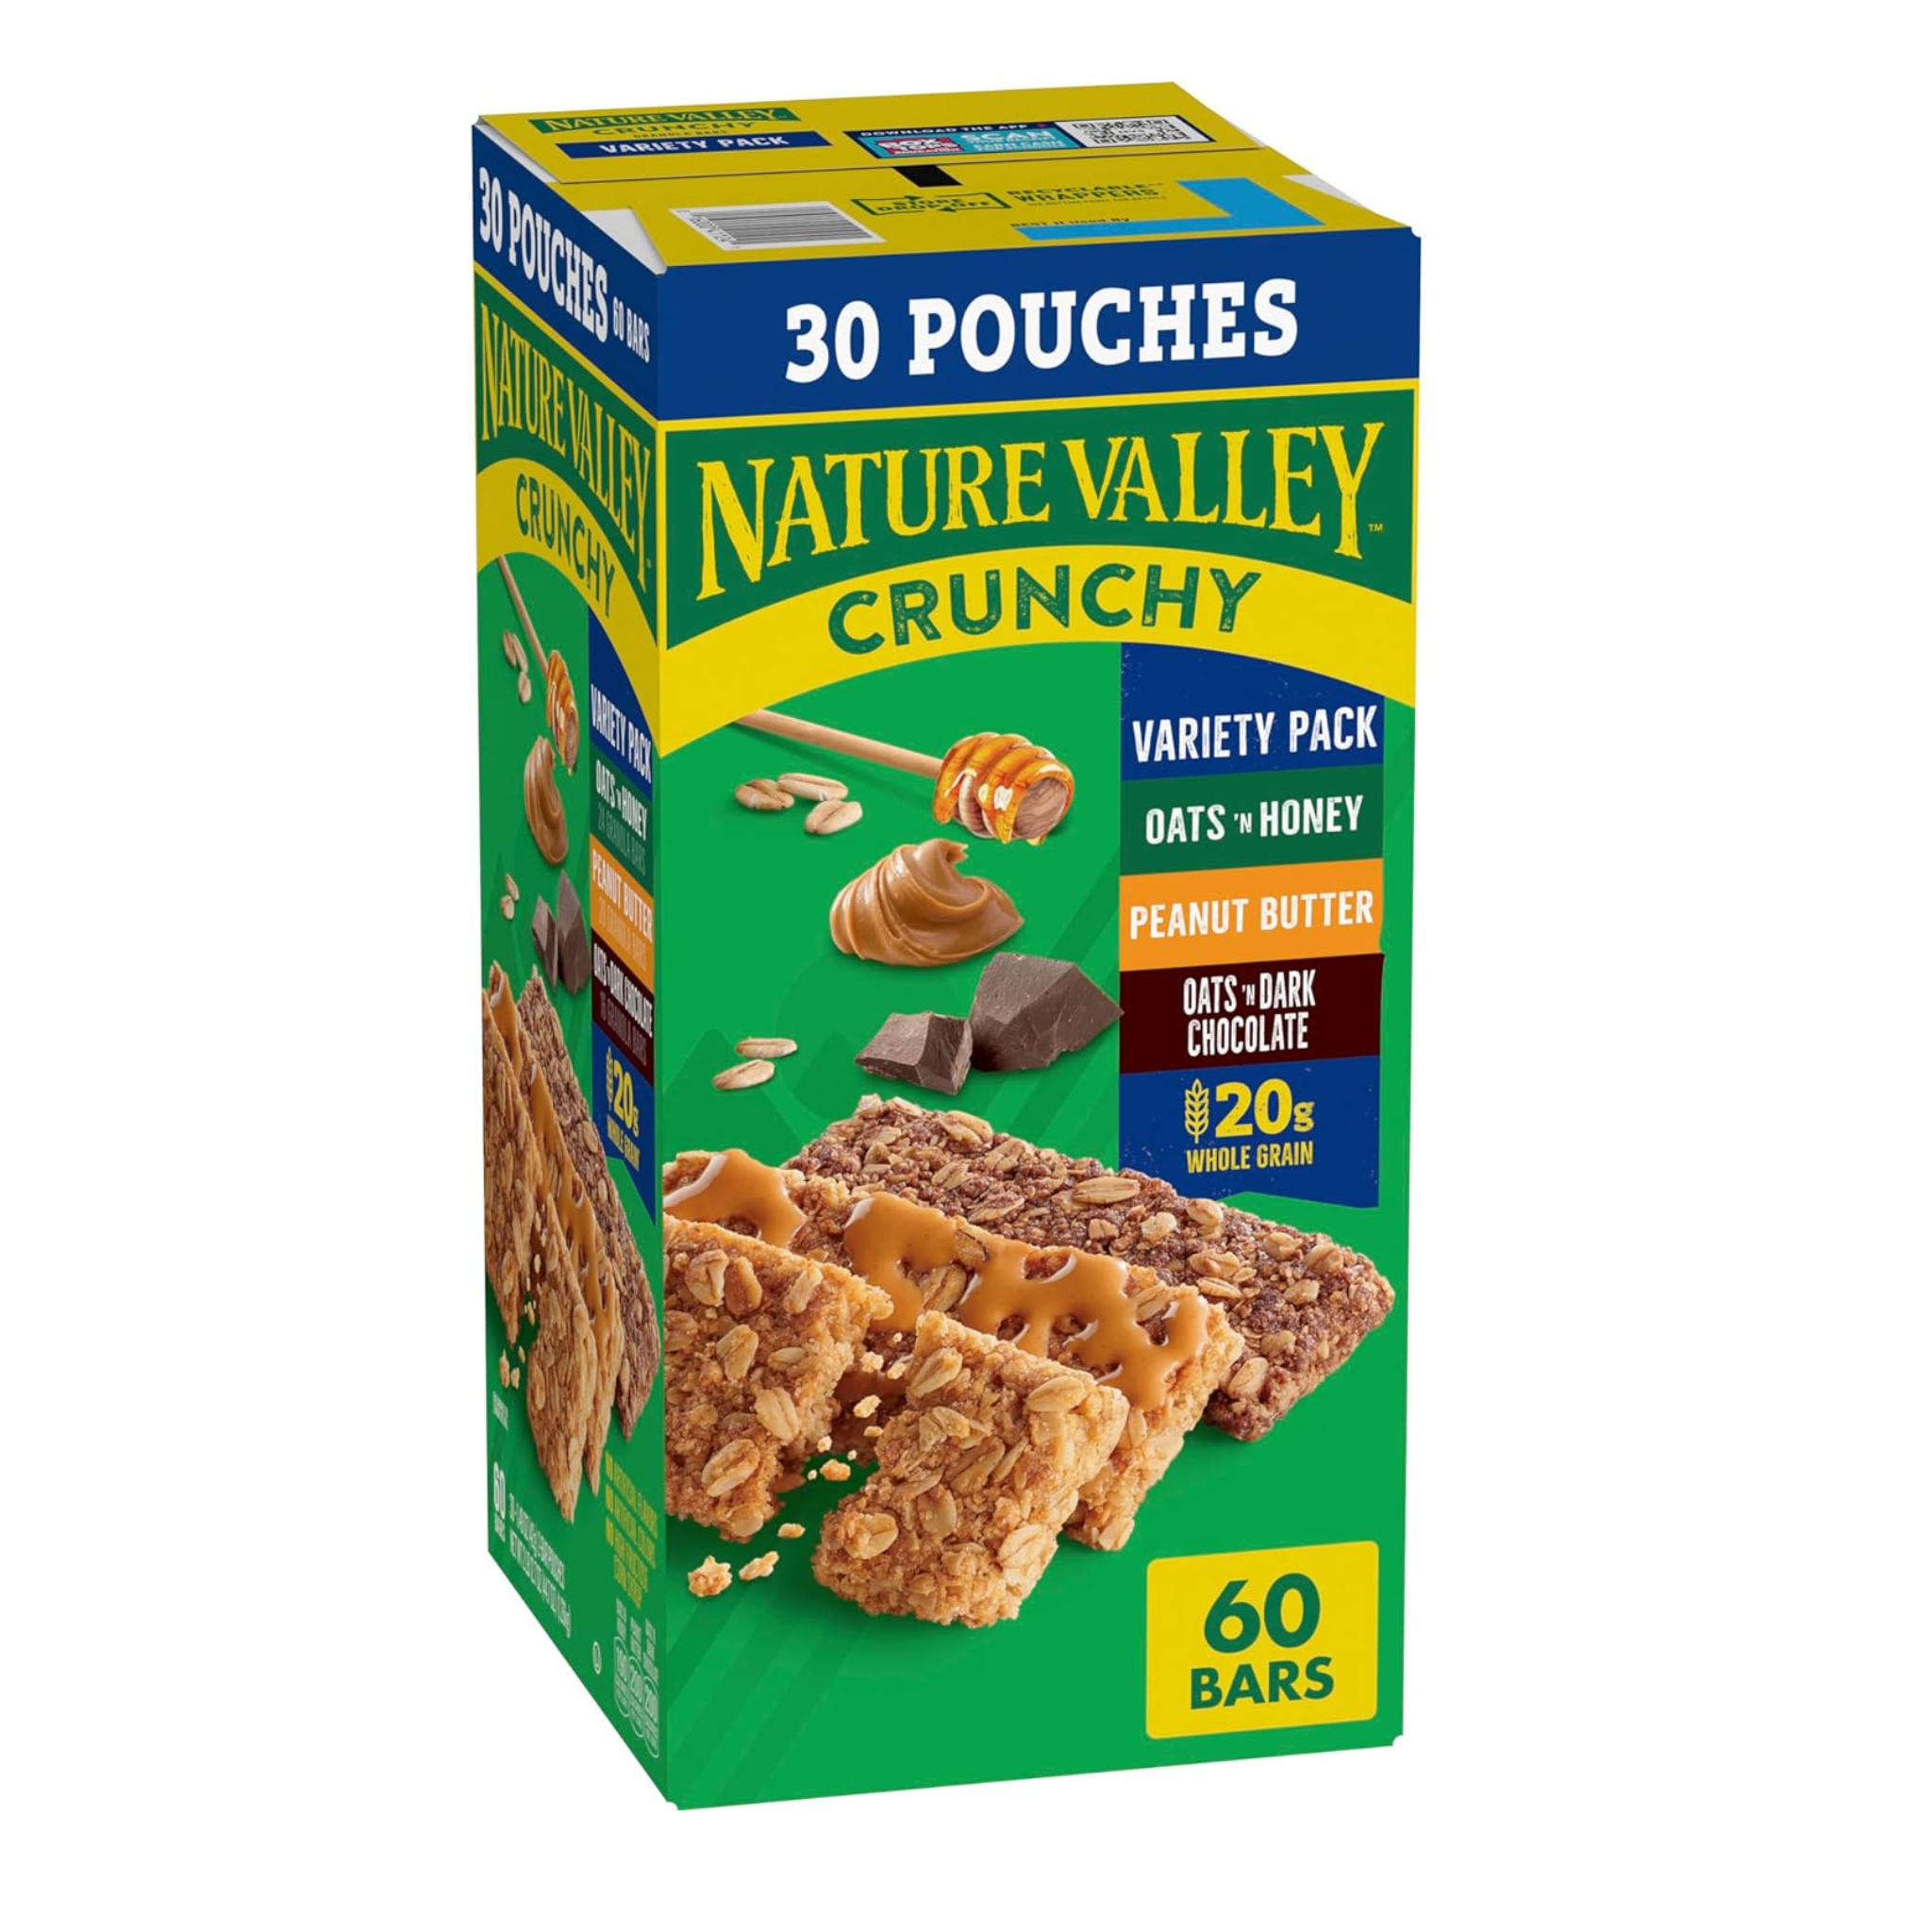 Nature Valley Crunchy Granola Bars, Value Pack, 60 Bars (30 Pouches)